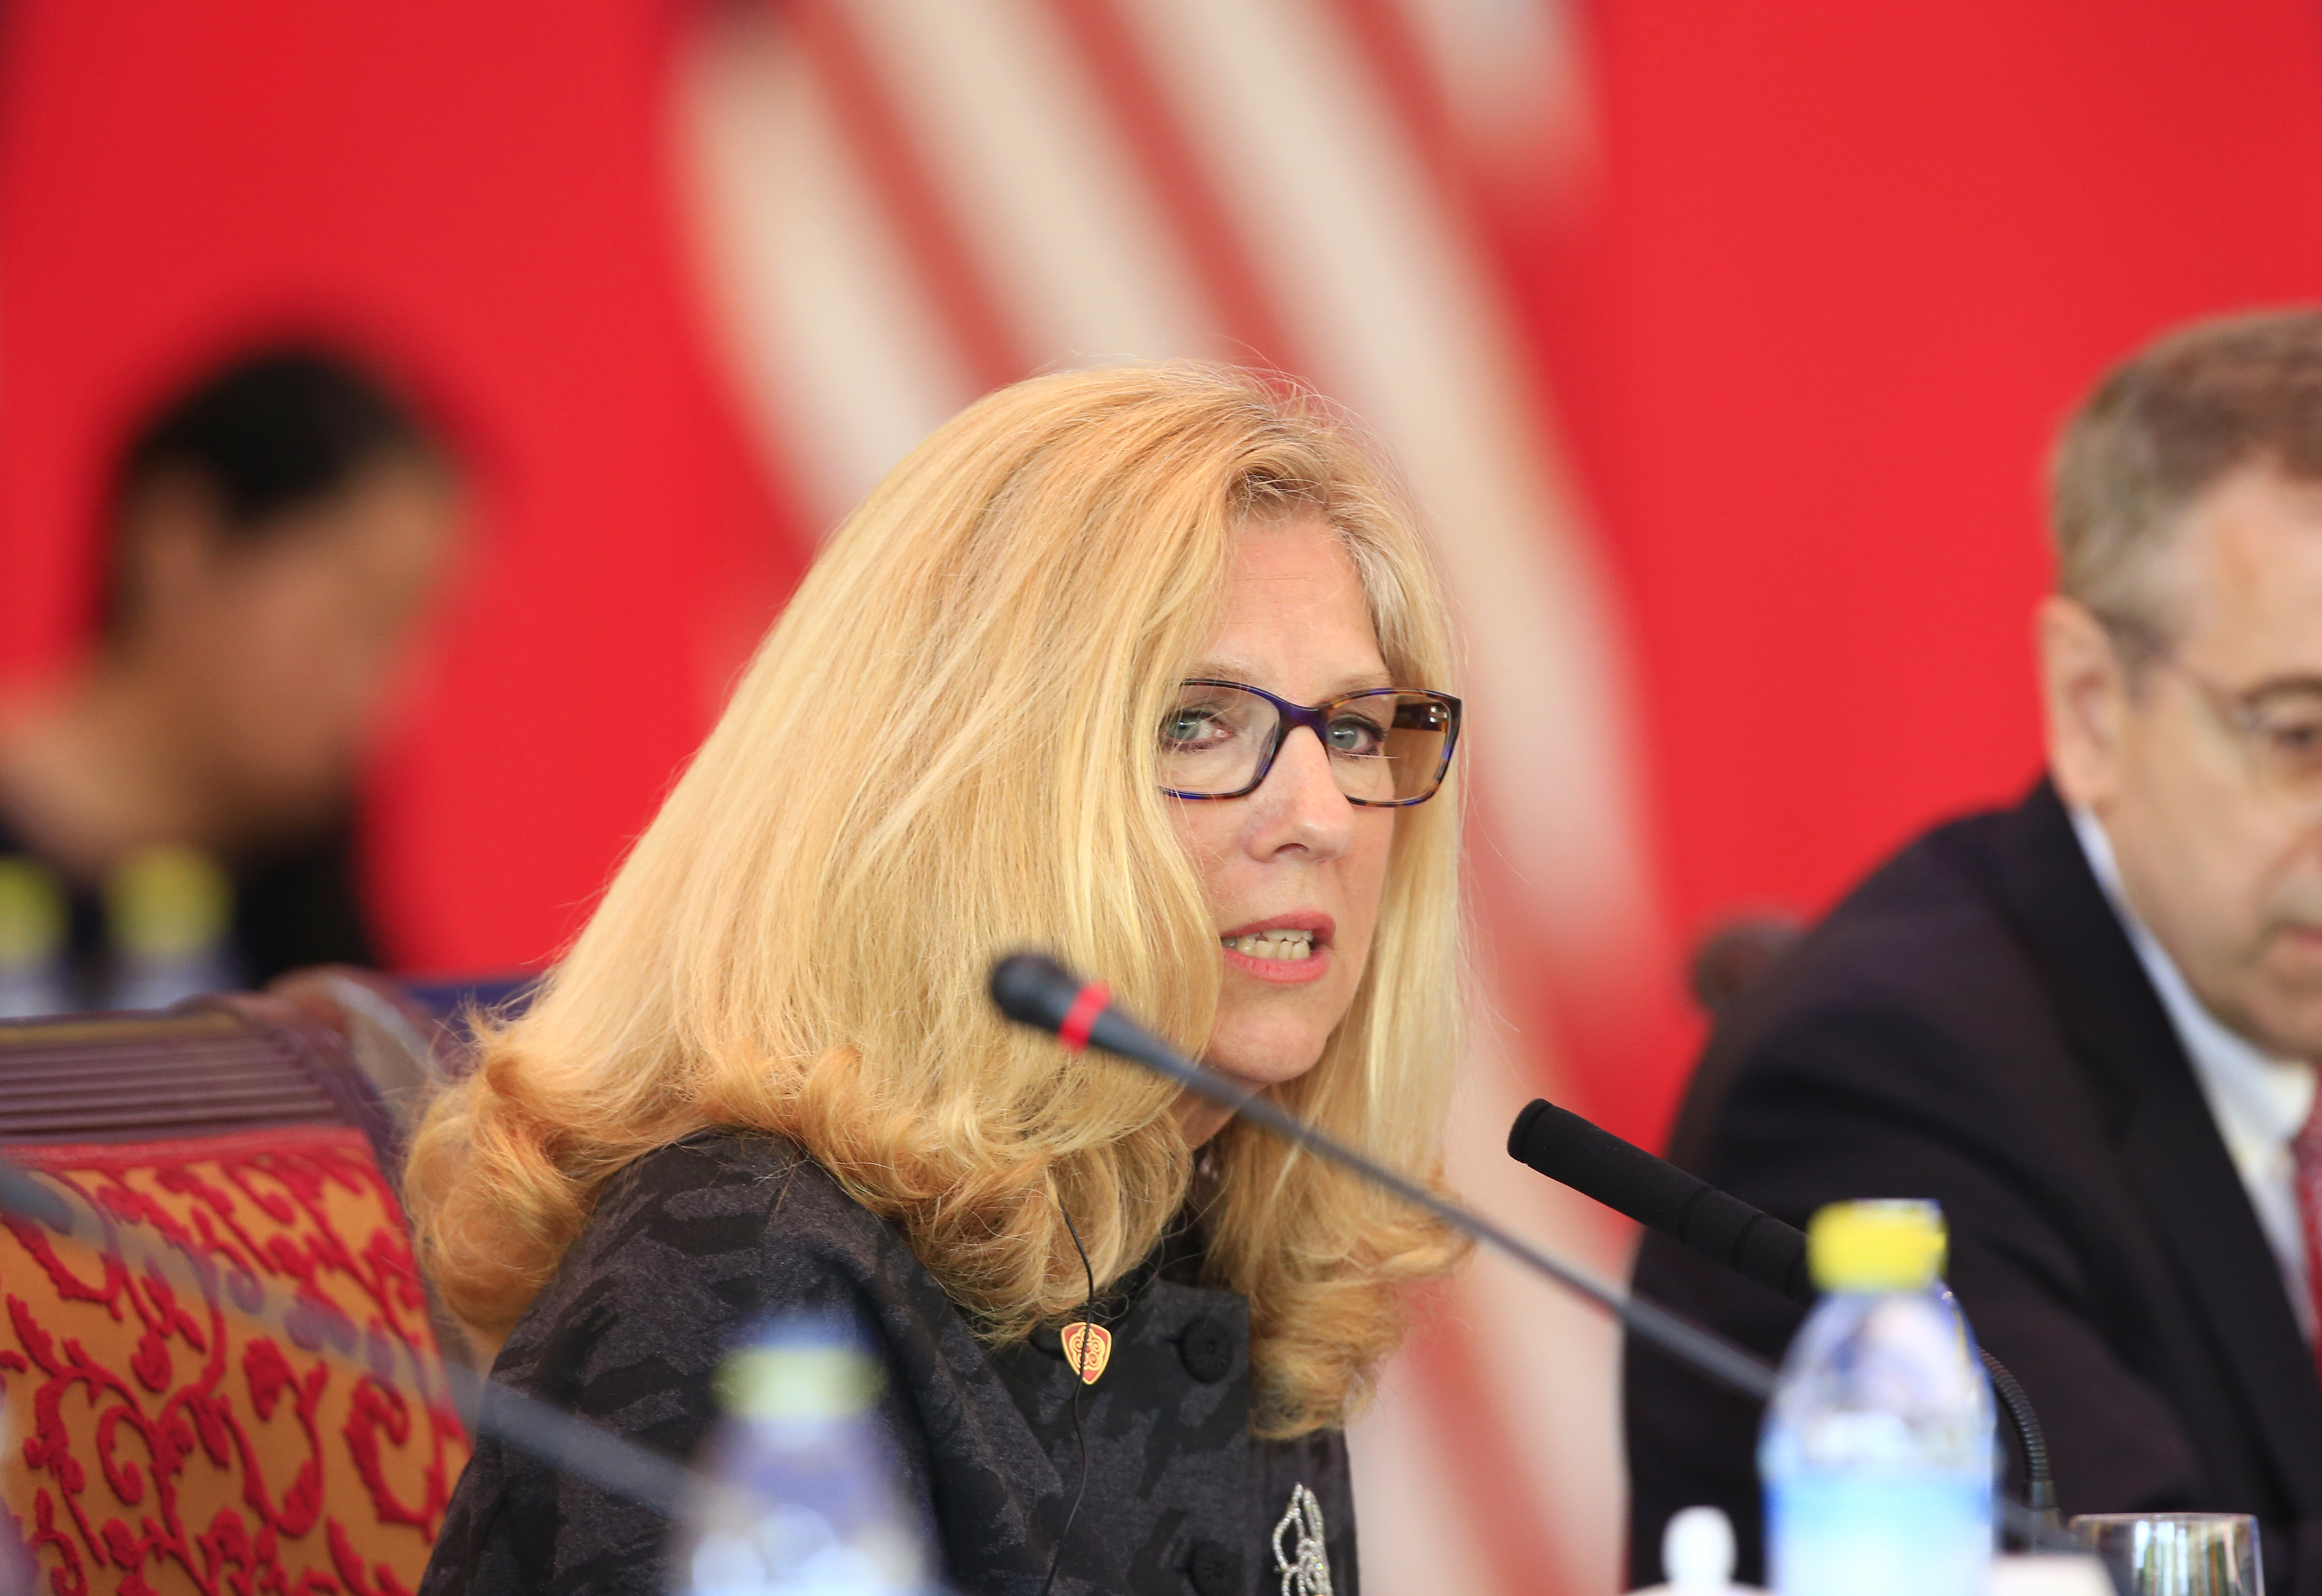 U.S. Homeland Security Department Undersecretary Suzanne Spaulding, speaks during the Second U.S.-China High-Level Joint Dialogue on Cybercrime and Related Issues at Diaoyutai State Guesthouse in Beijing, Tuesday, June 14, 2016. (Jason Lee/Pool Photo via AP)